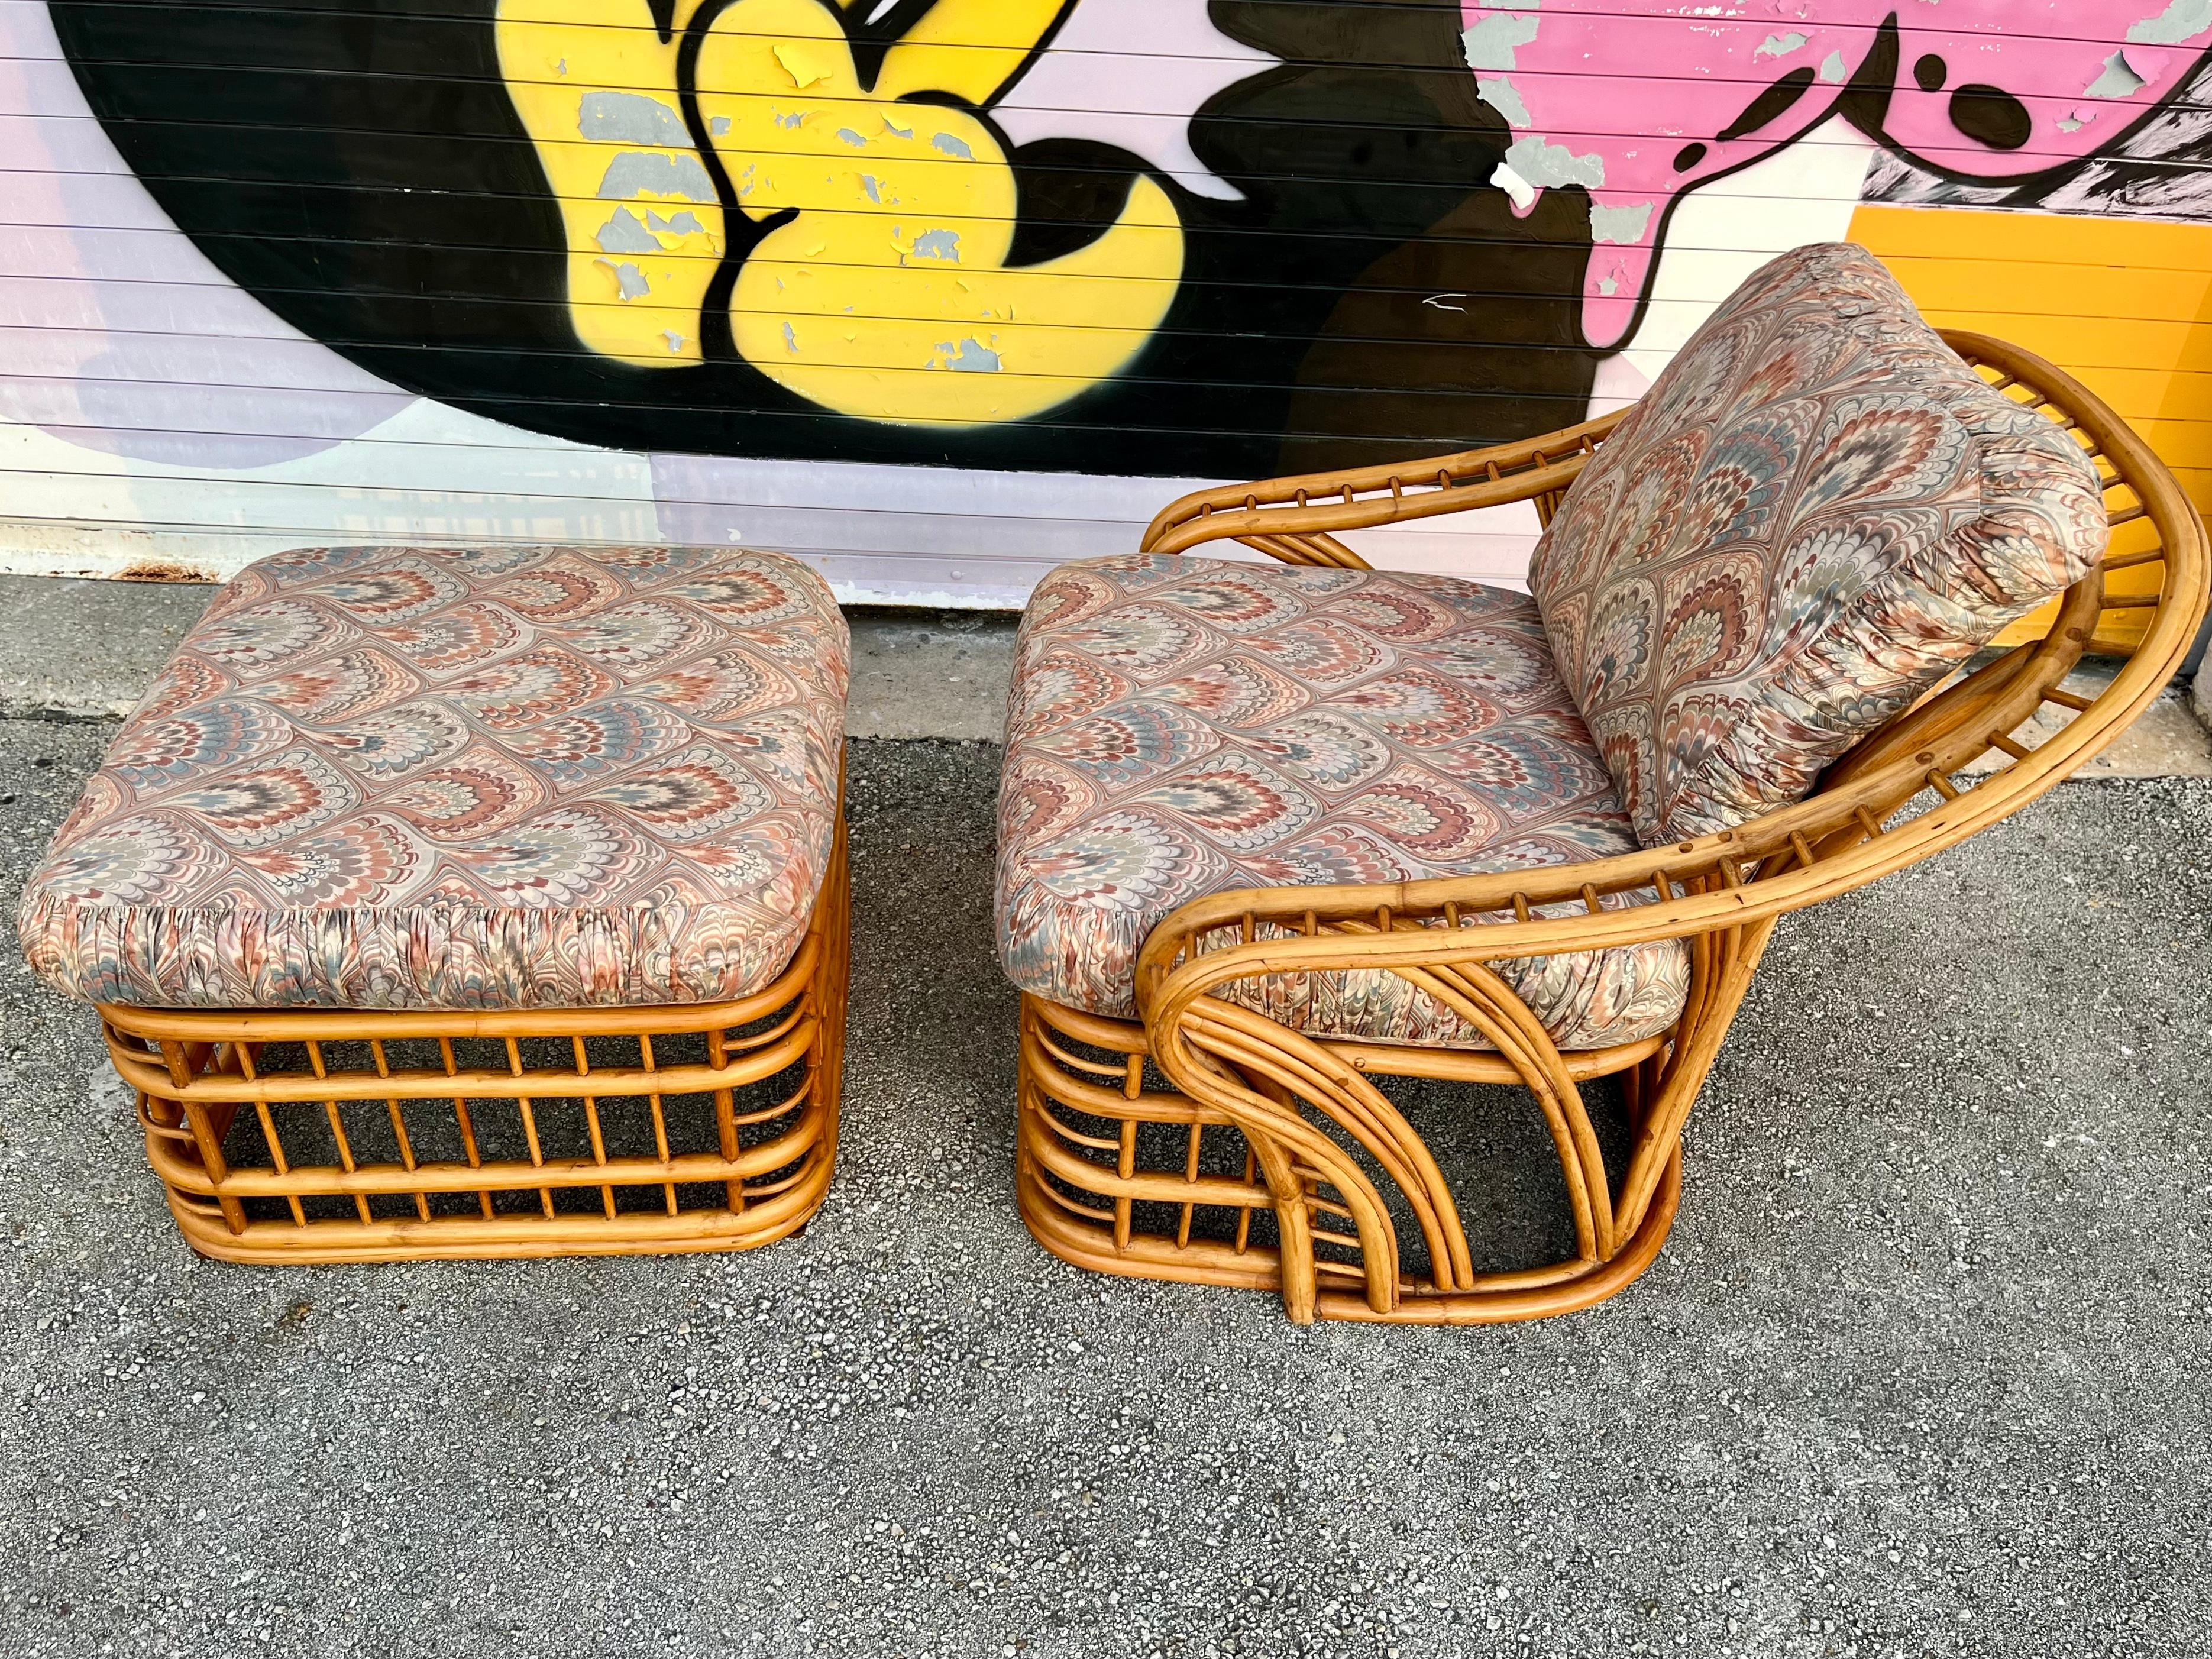 Wicker Coastal Style Rattan Lounge Chair and Ottoman Set by Whitecraft Rattan. C 1970s  For Sale